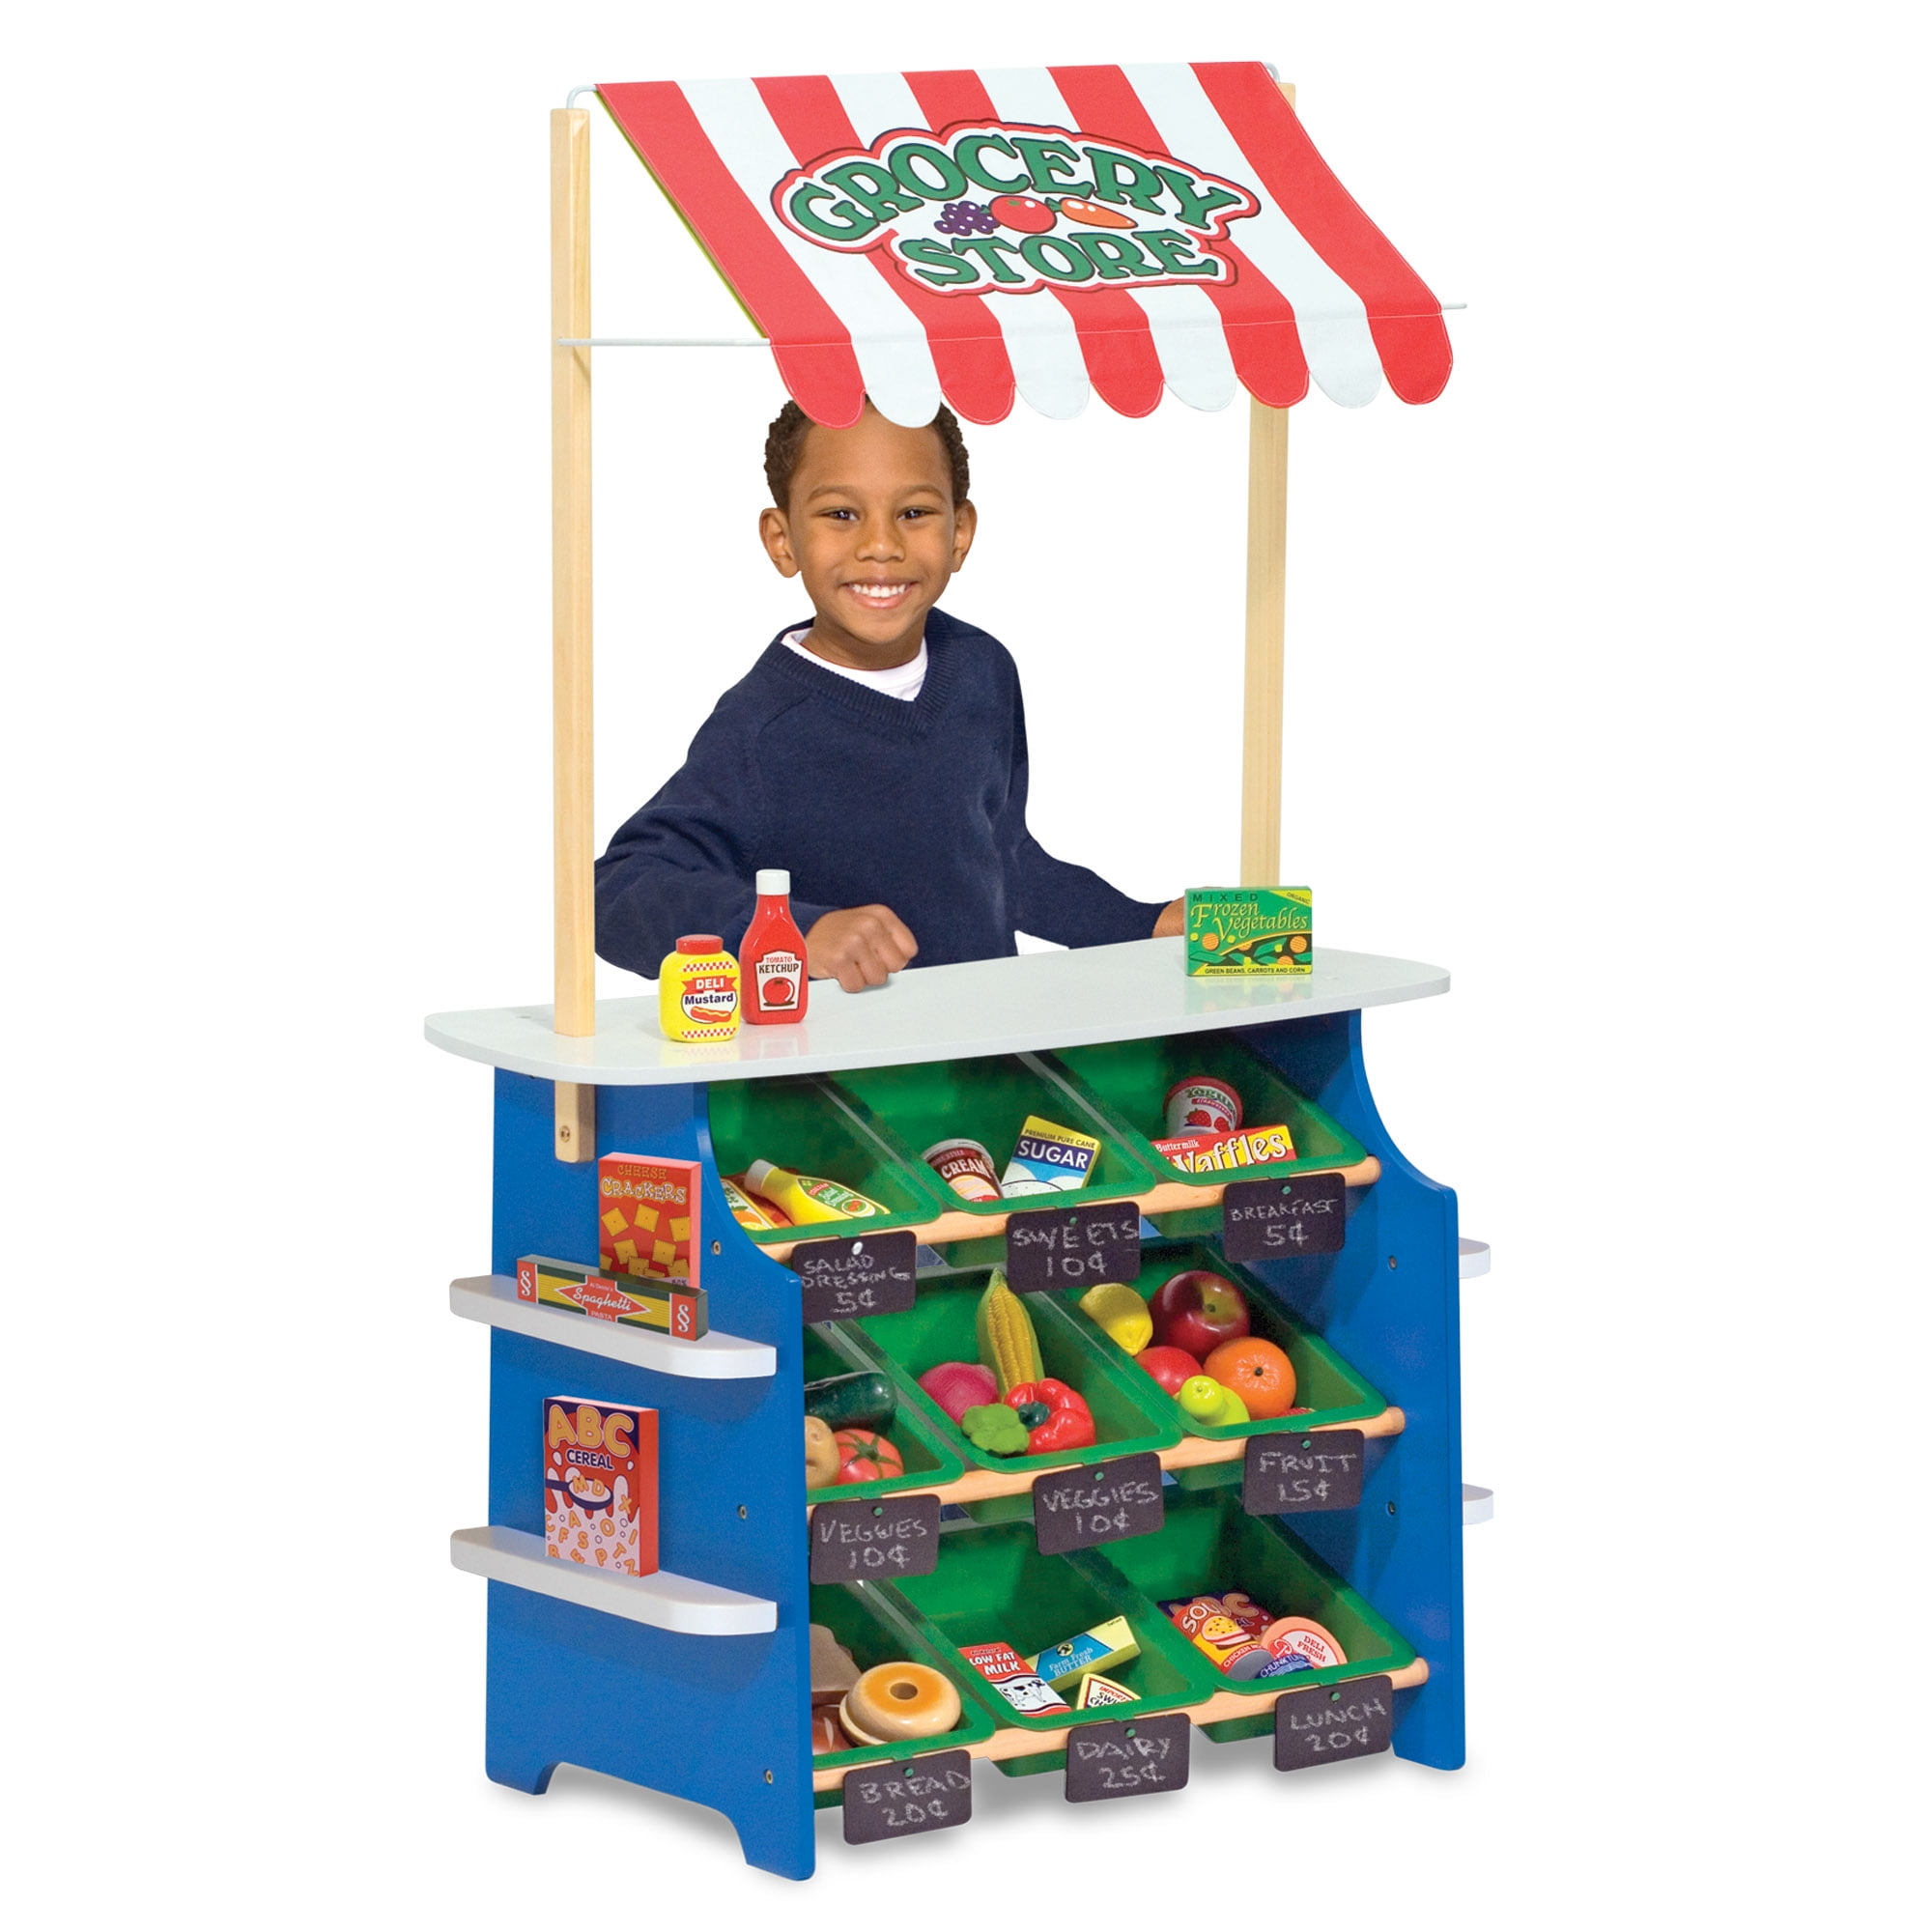 Melissa & Doug Wood Grocery Lemonade Stand Role Play Toy for Ages 3years for sale online 